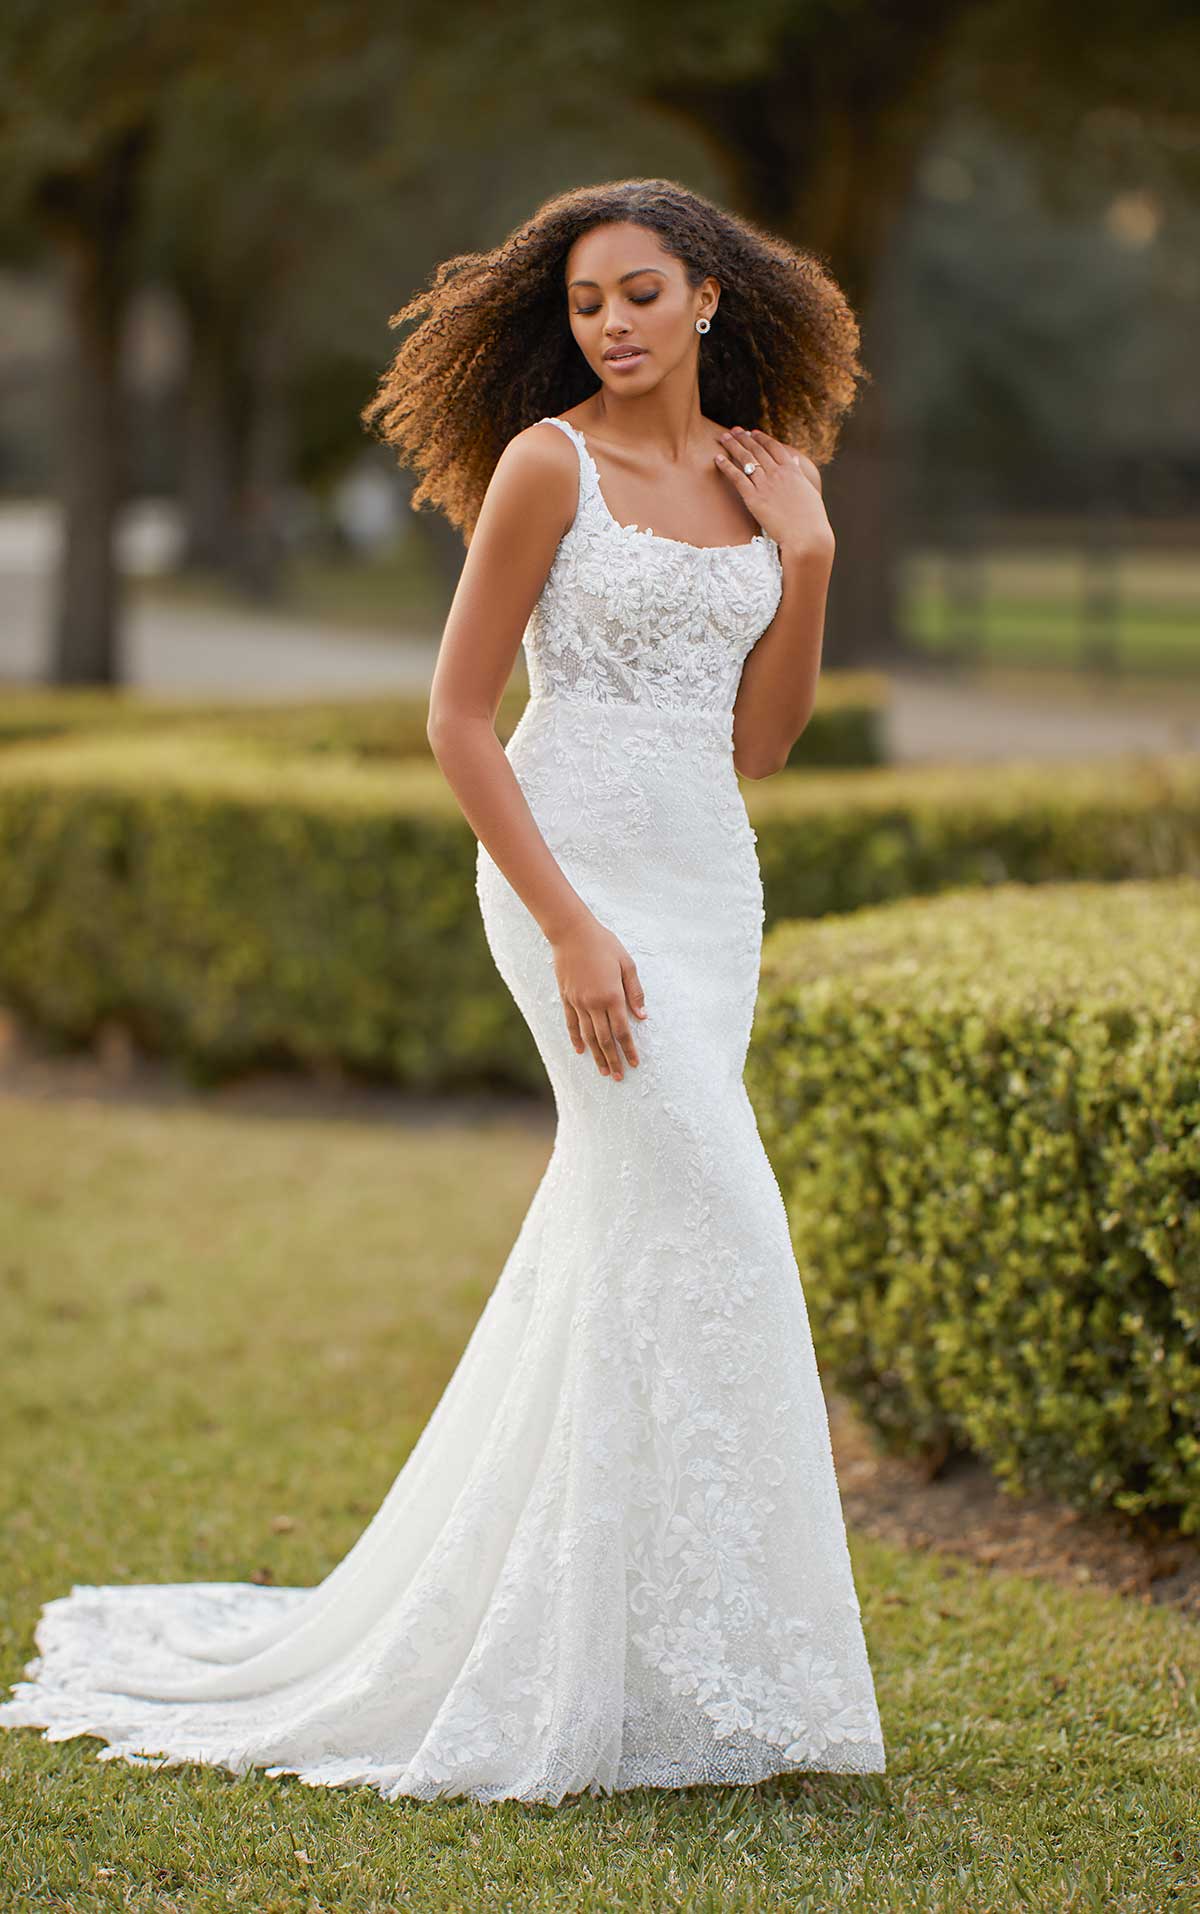 Top Lace And Beading Wedding Dress Don t miss out | blinkdress3